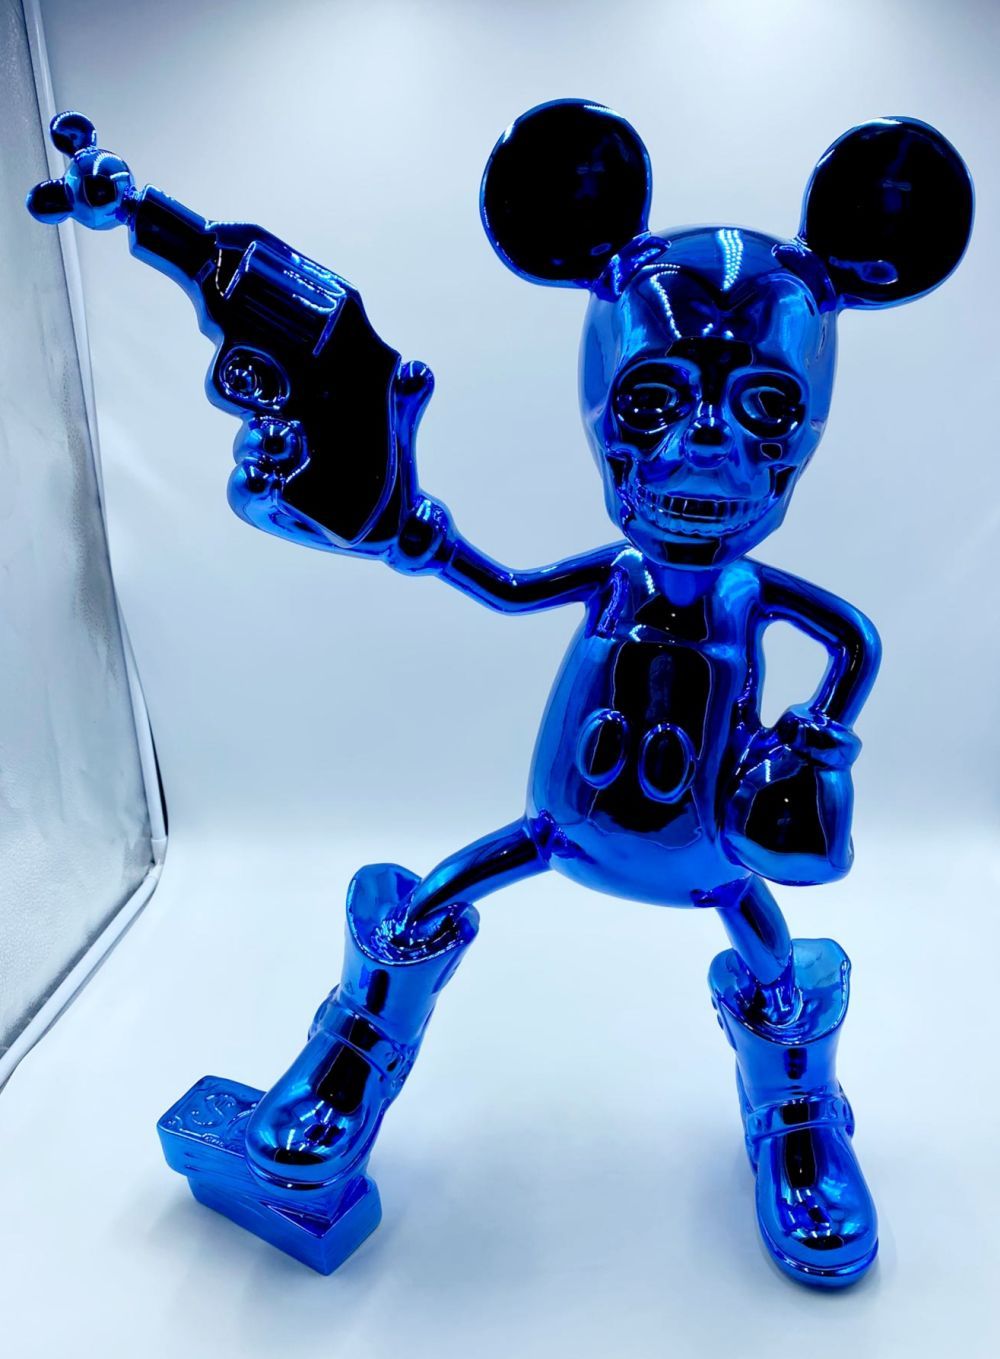 Dom'One - Mickey Blue Dom'One - Mickey Blue



Chrome resin

Hand signed

Unique&hellip;